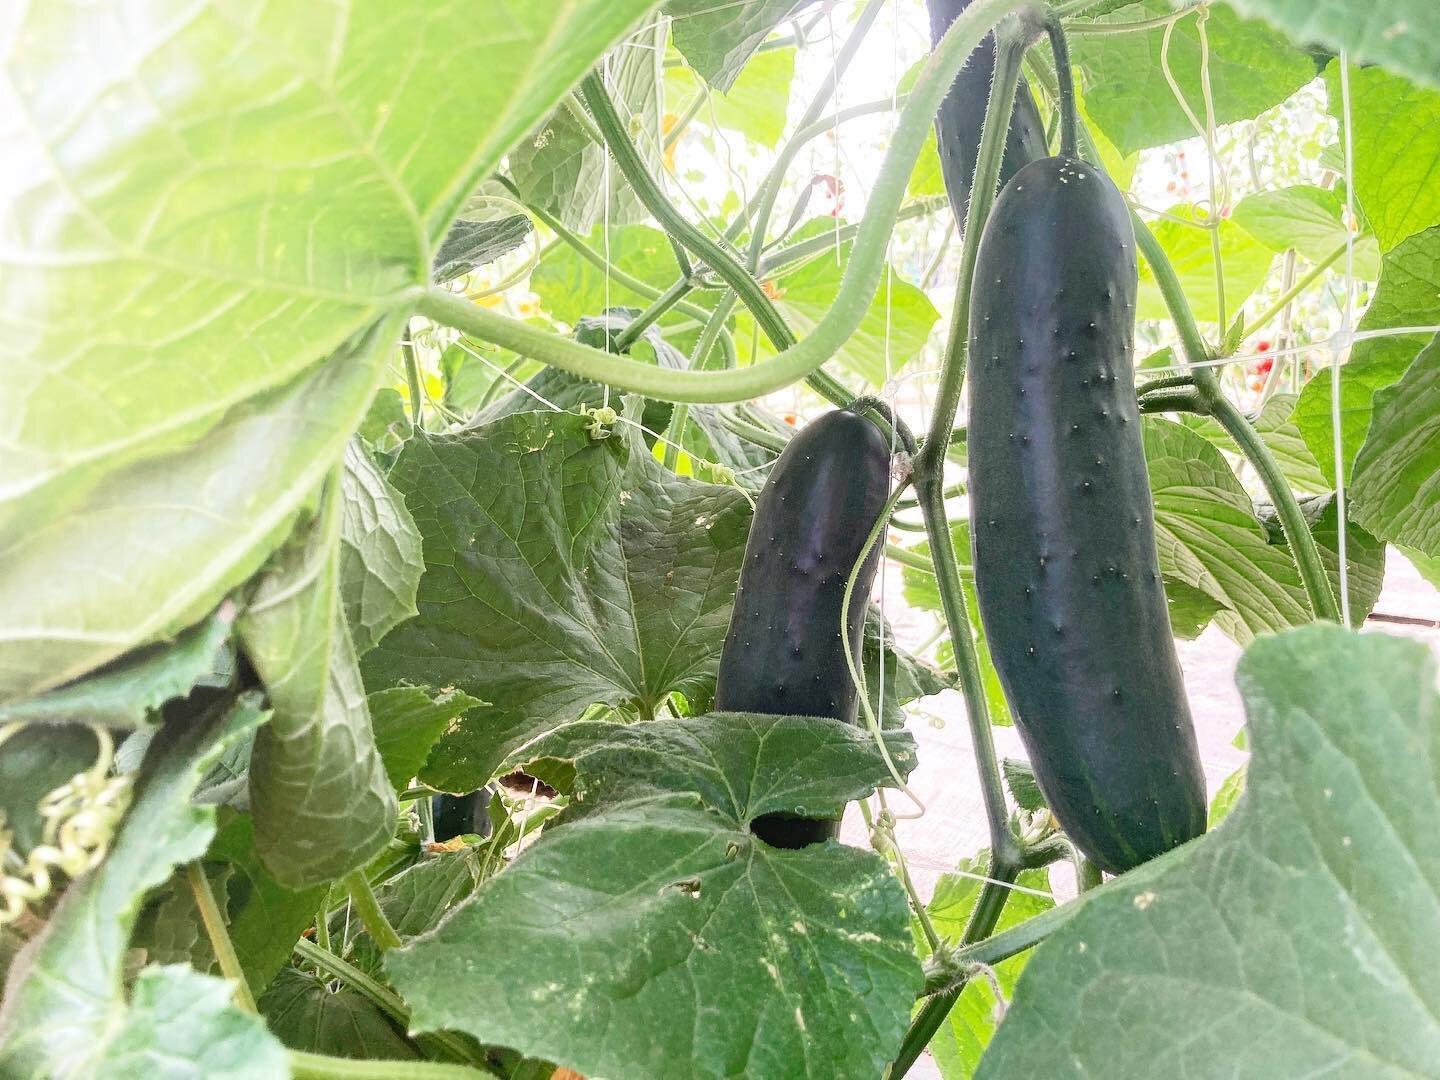 Cucumbers are coming in hot! The plants have climbed their trellis and formed a wall of cucumbers. I&rsquo;m harvesting twice a week now and picked 50lb last time I harvested. Souri is making pickles so we&rsquo;ll have lots of fresh and pickled cucu